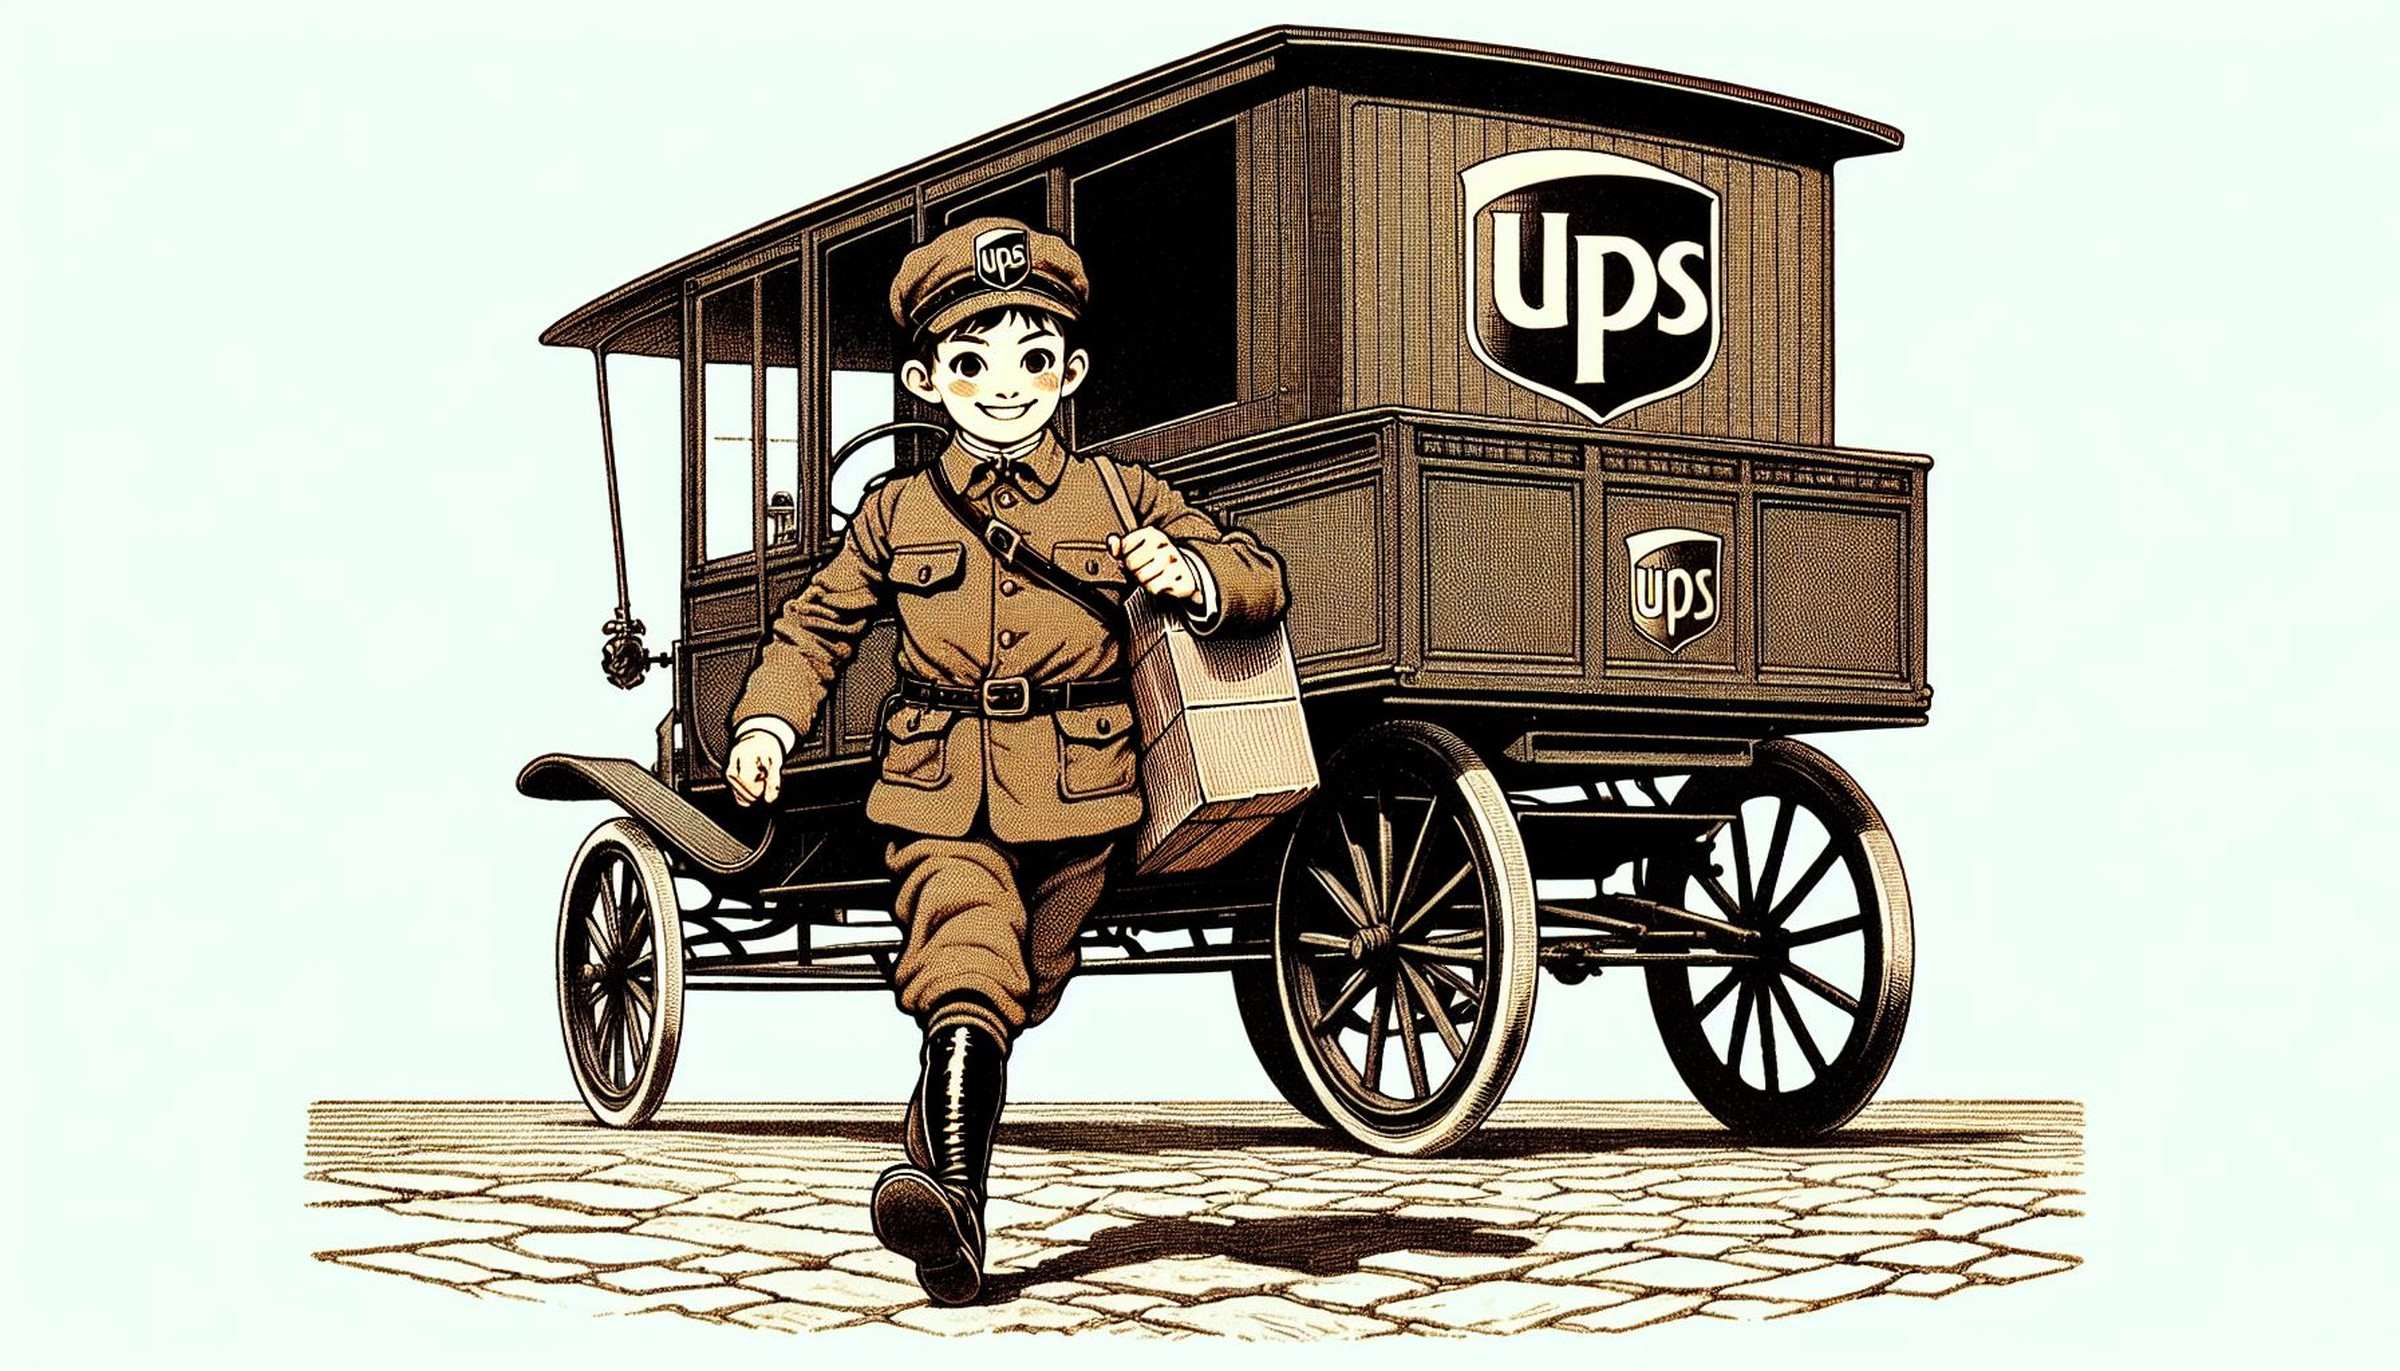 “An illustrated image of a UPS delivery man from 1910. In the style of early Japanese cartoons.”